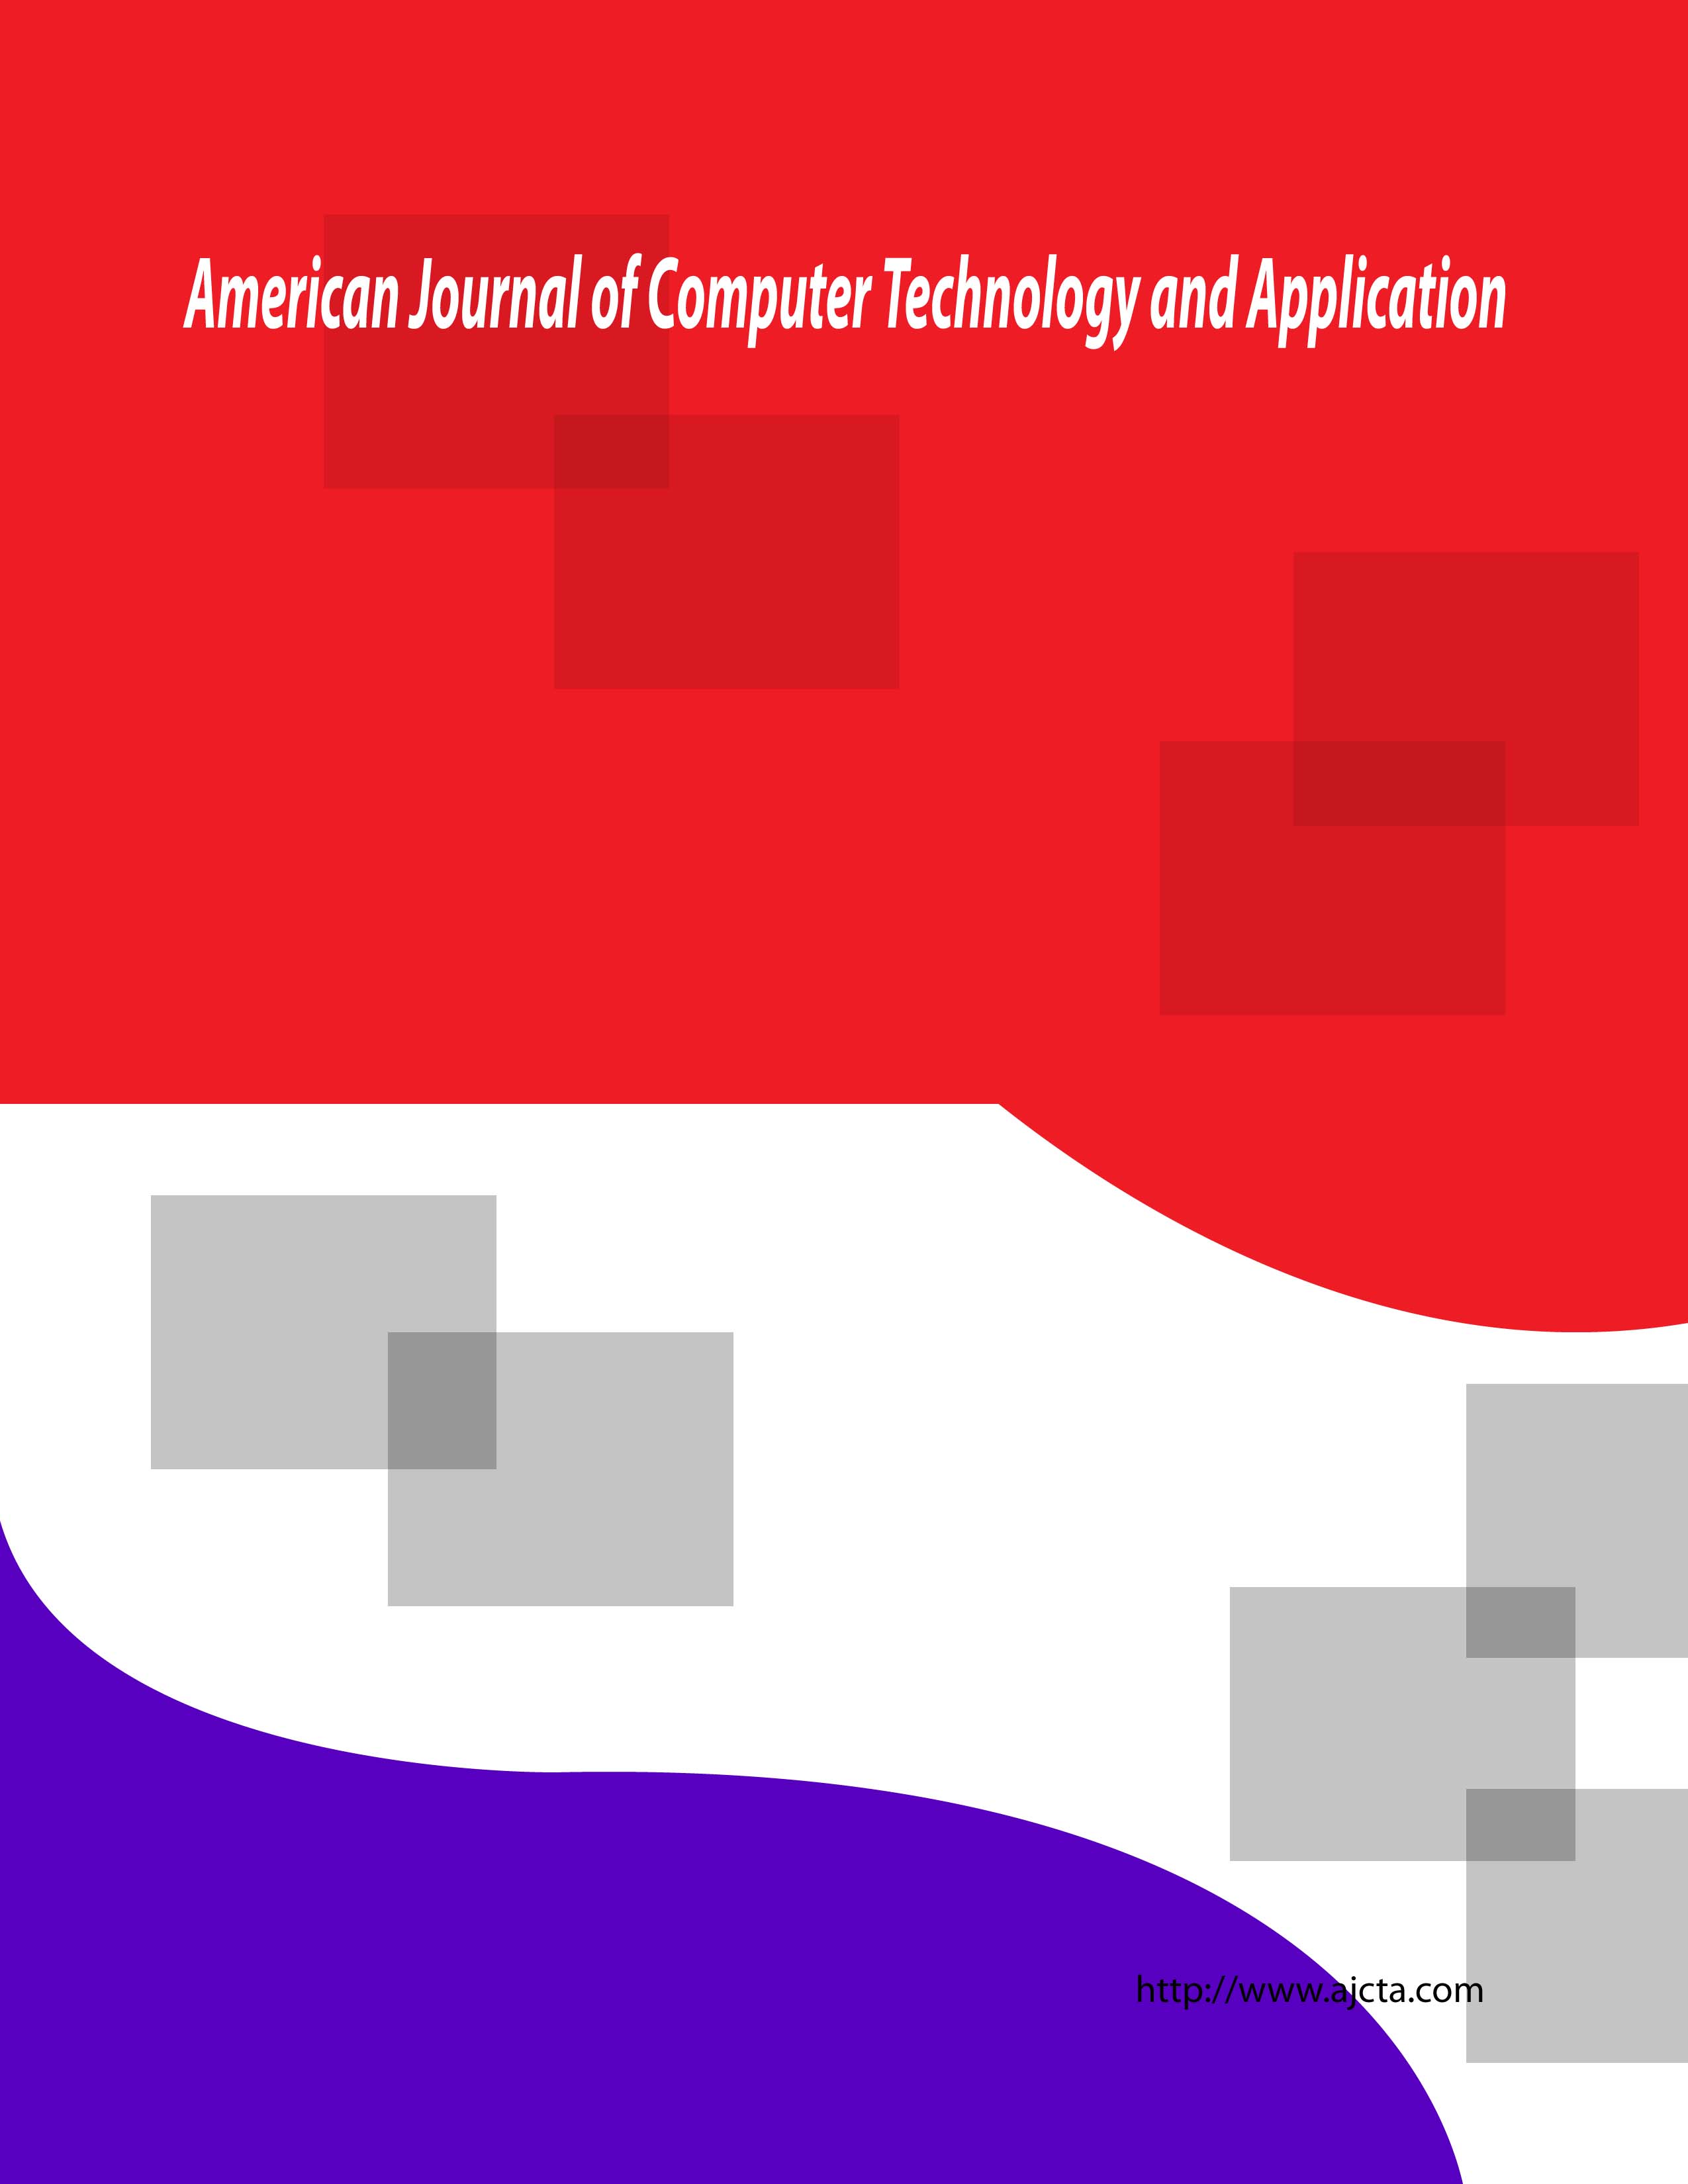 American Journal of Computer Technology and Application